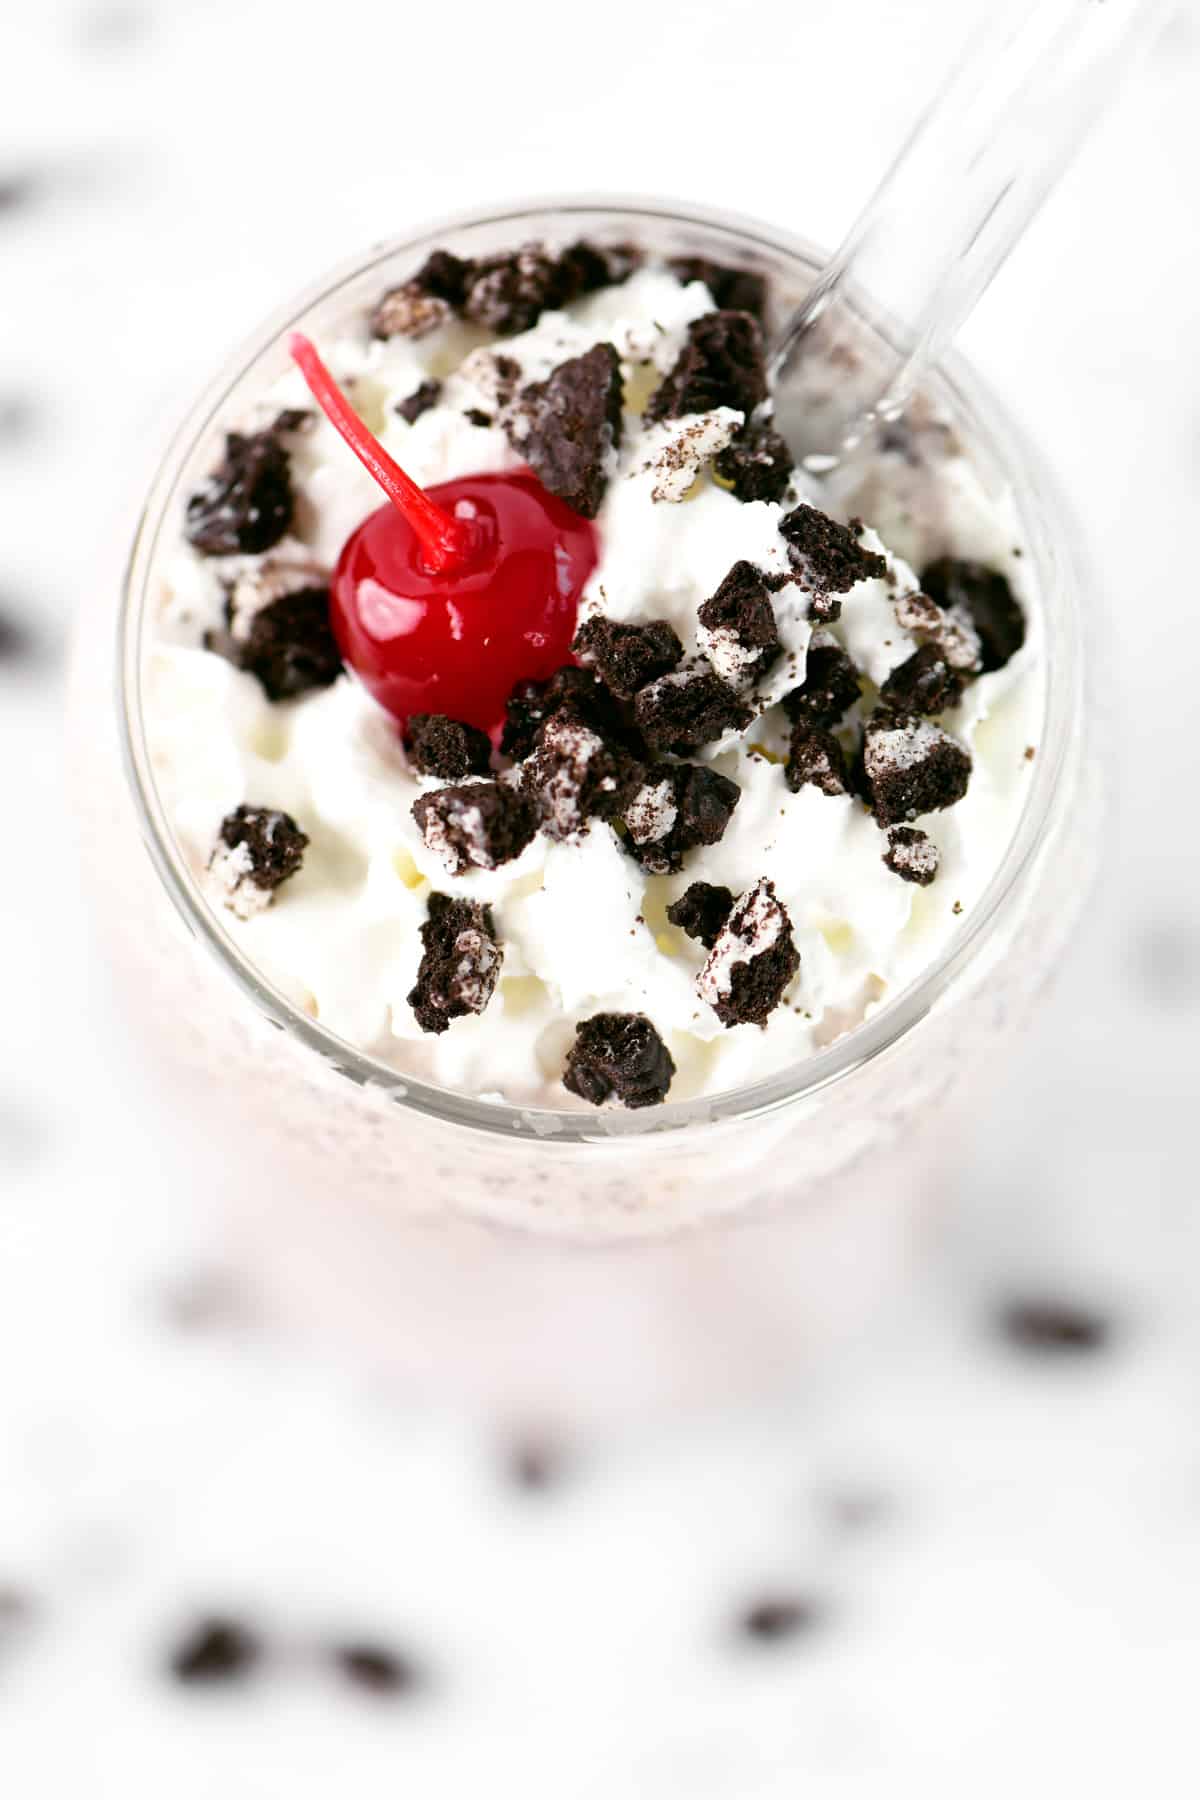 Whipped cream, cookie crumbs and a cherry on a milkshake.